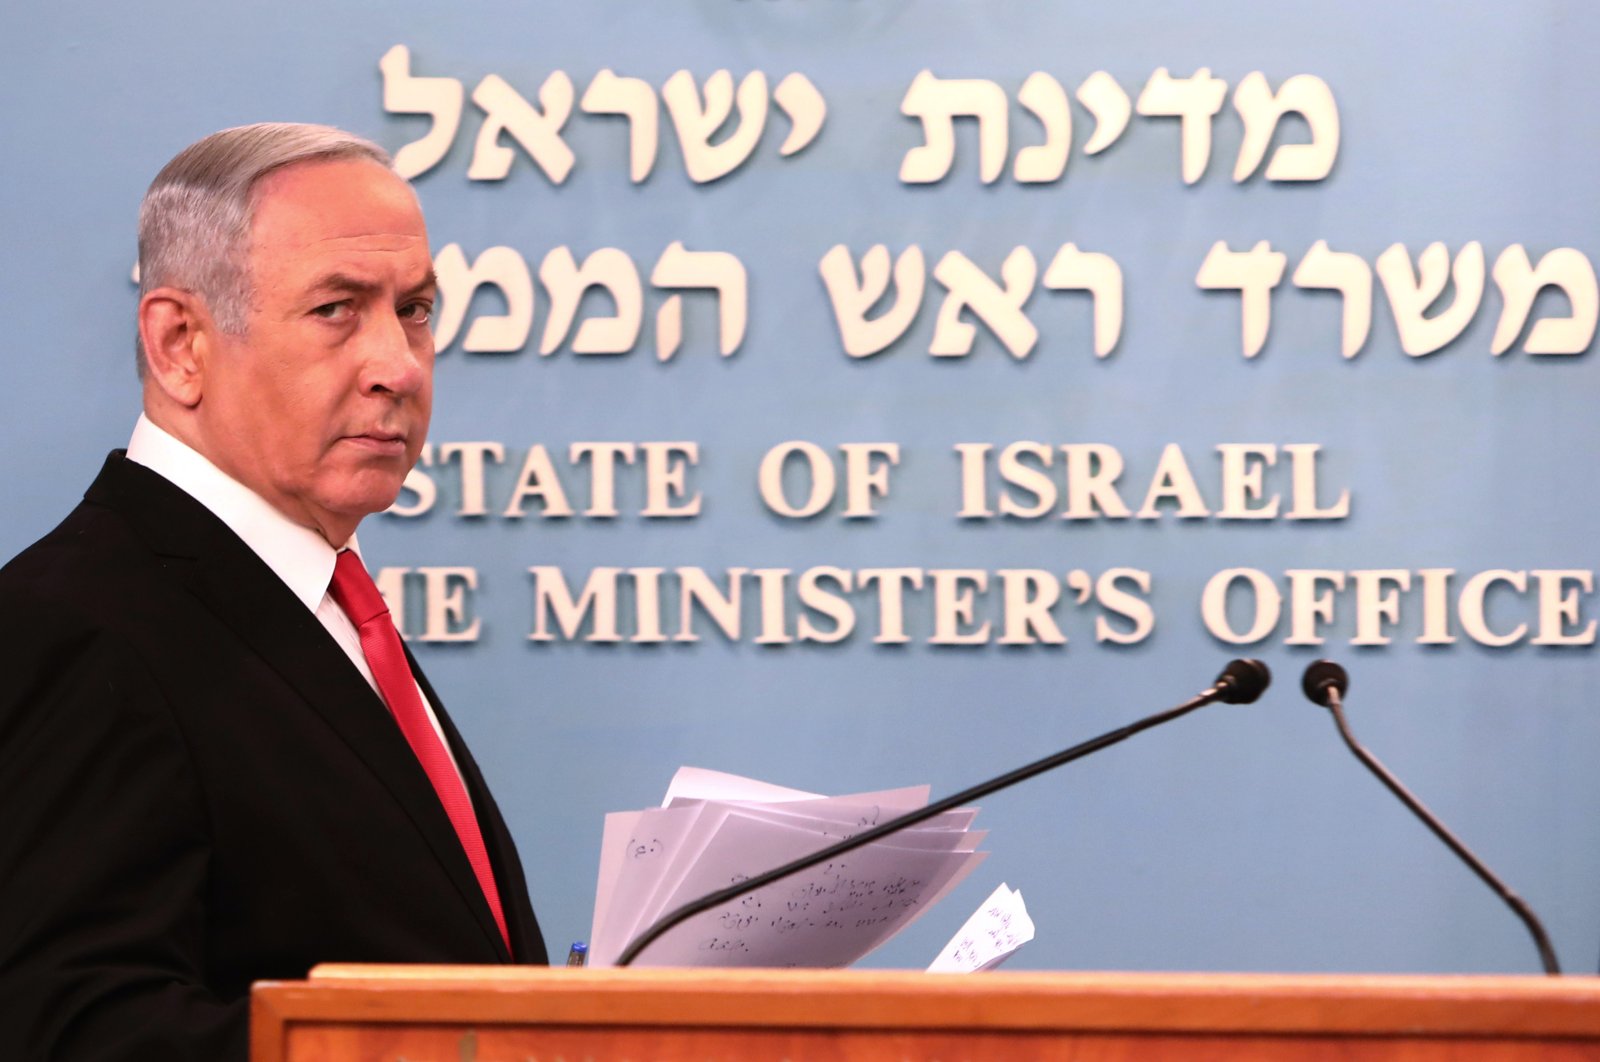 Israeli Prime Minister Benjamin Netanyahu approaches the podium to give a speech from his Jerusalem office, March 14, 2020. (AP Photo)